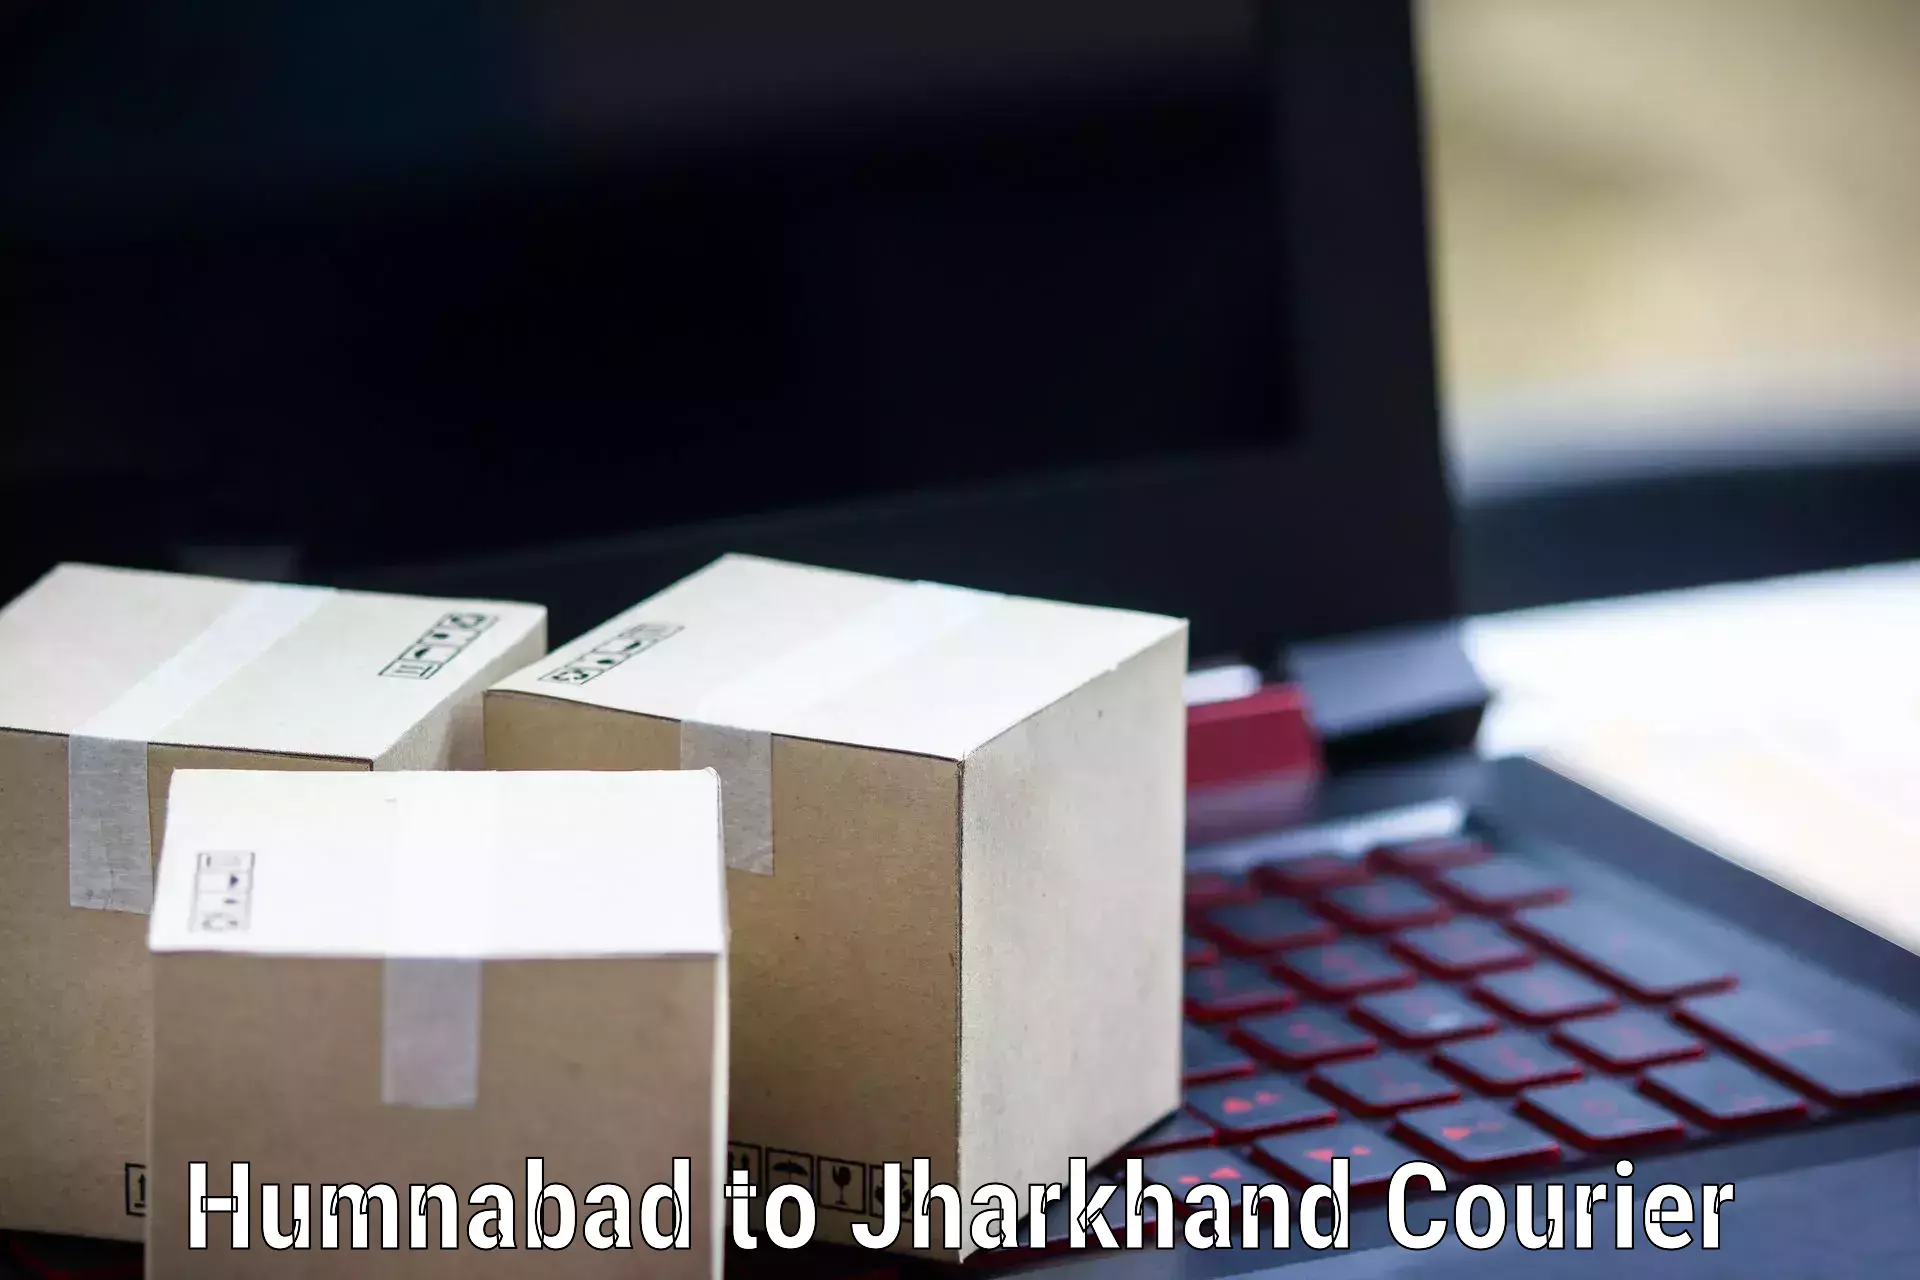 Advanced shipping technology Humnabad to Dhanbad